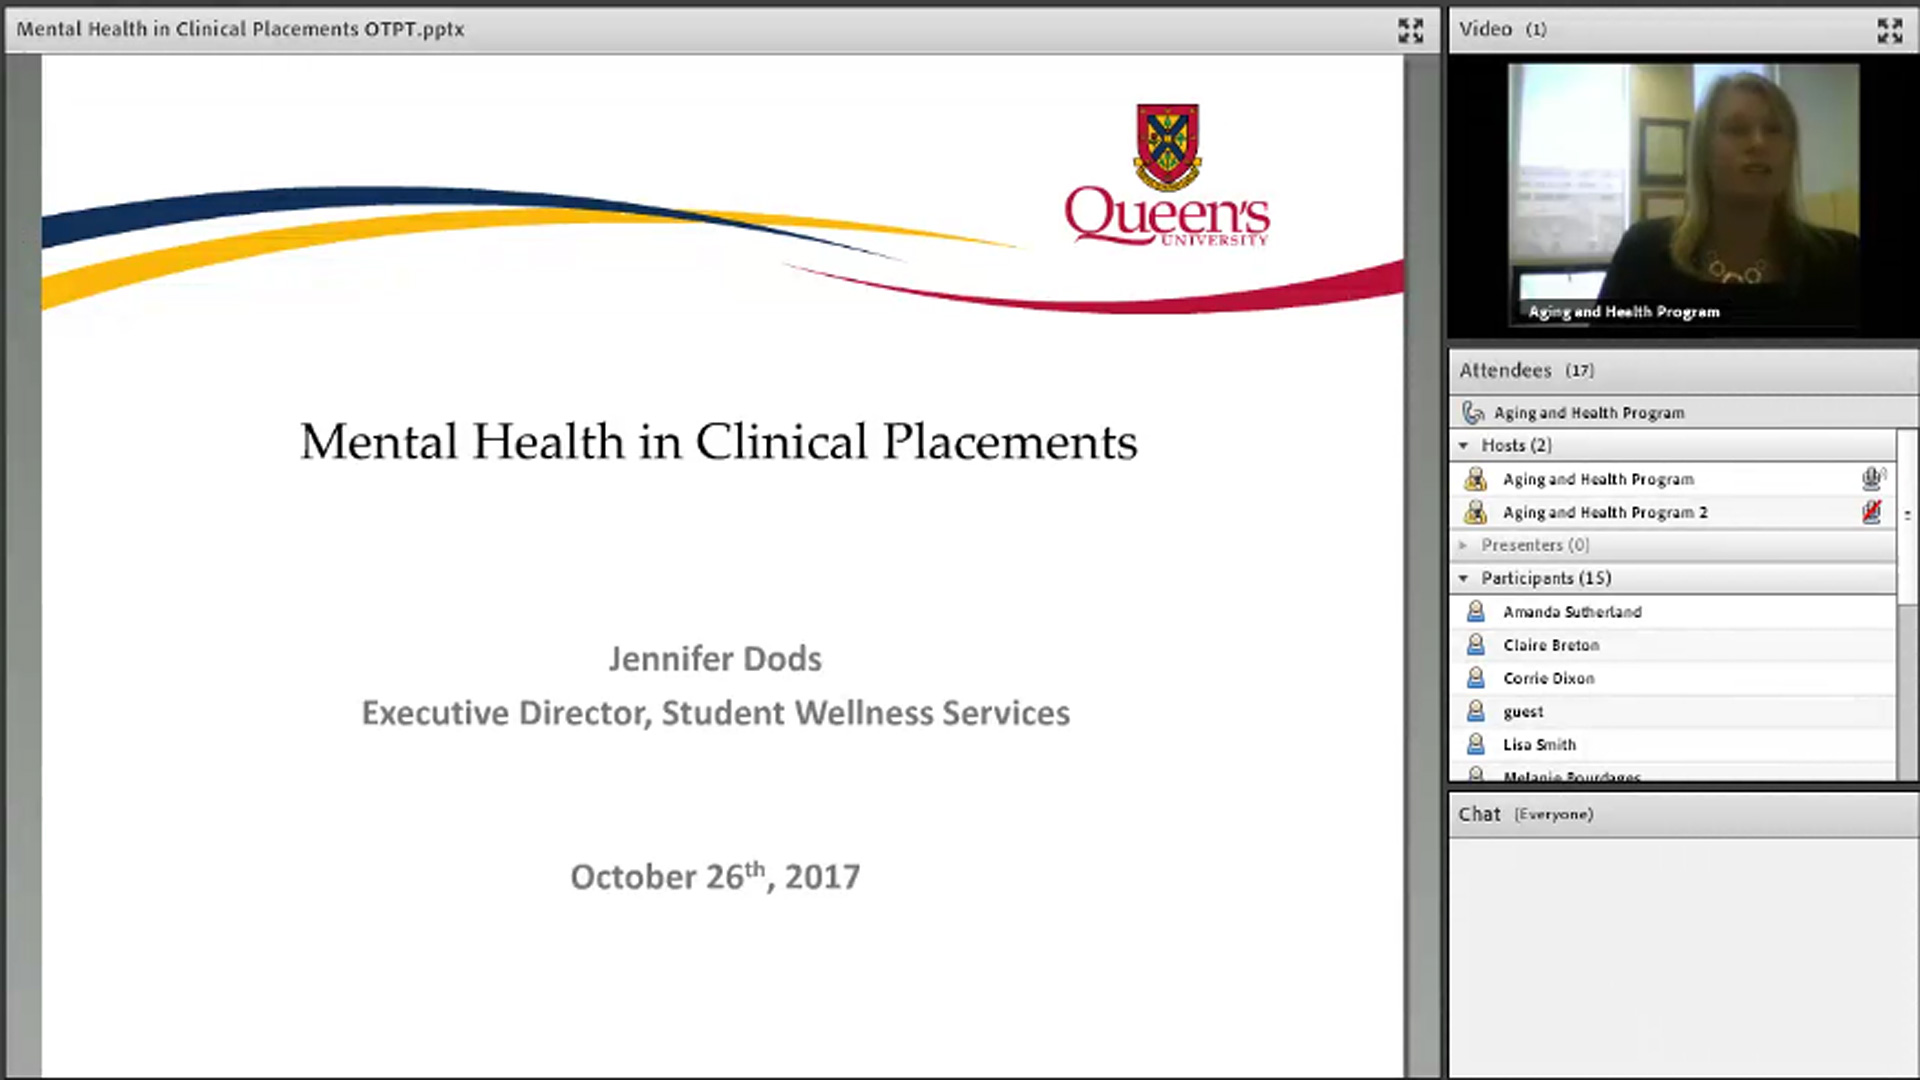 Mental Health in Clinical Placements